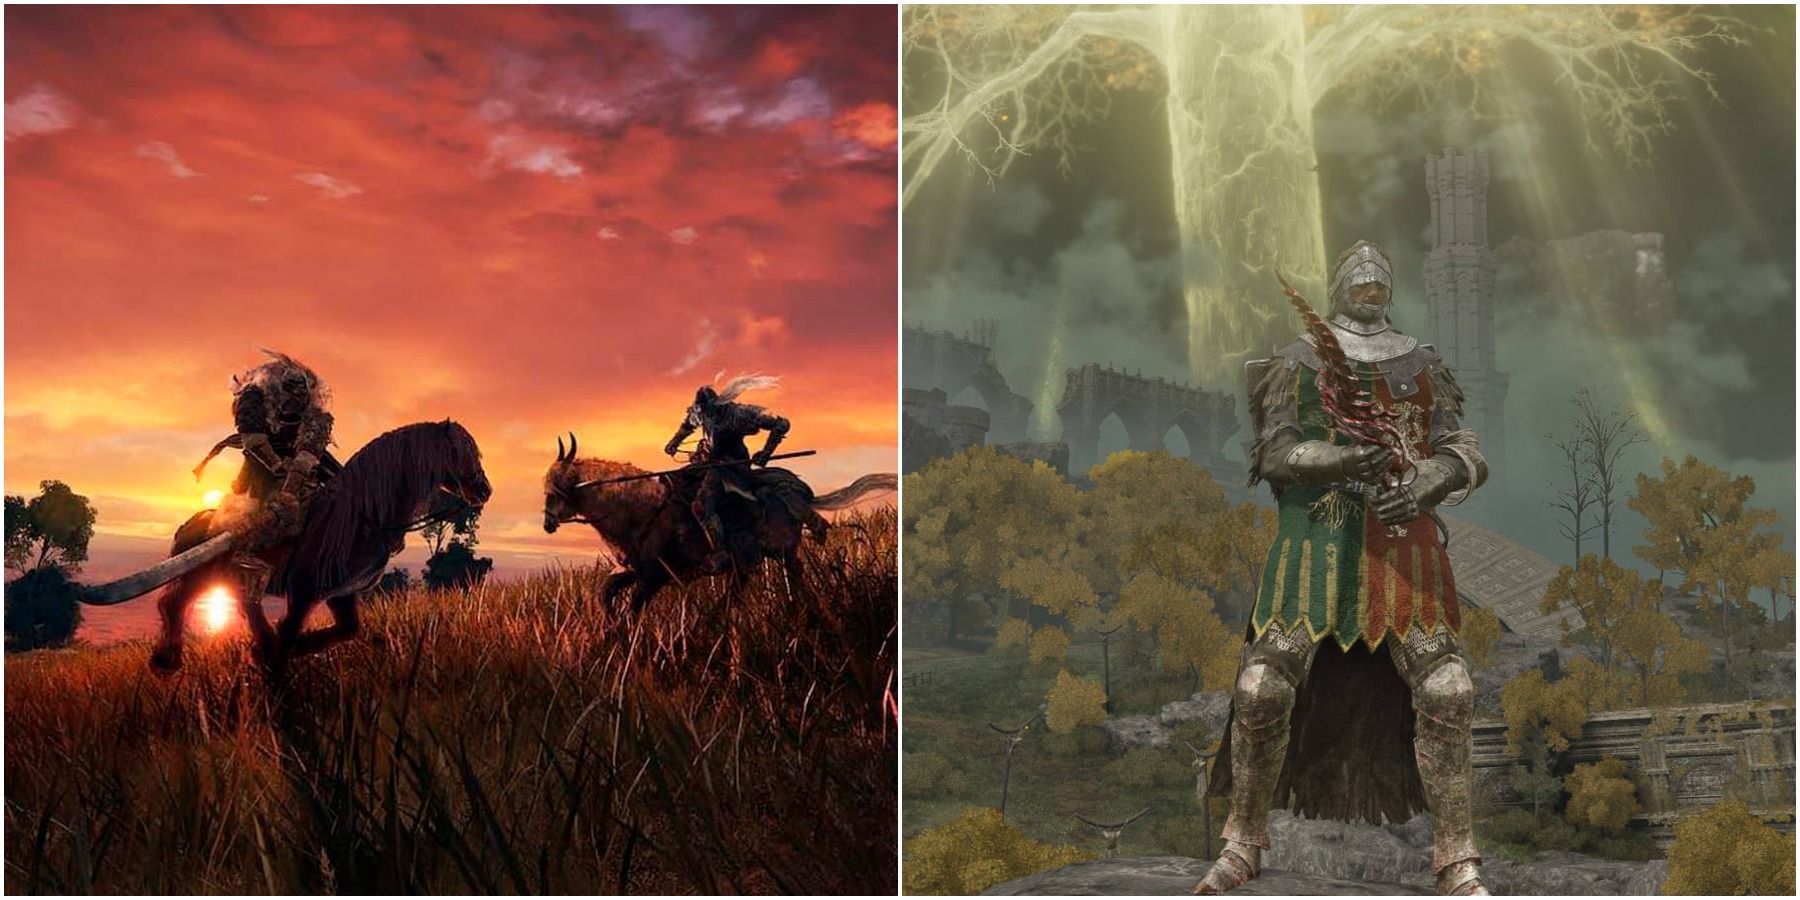 Split image of horseback fight and player character holding sword.